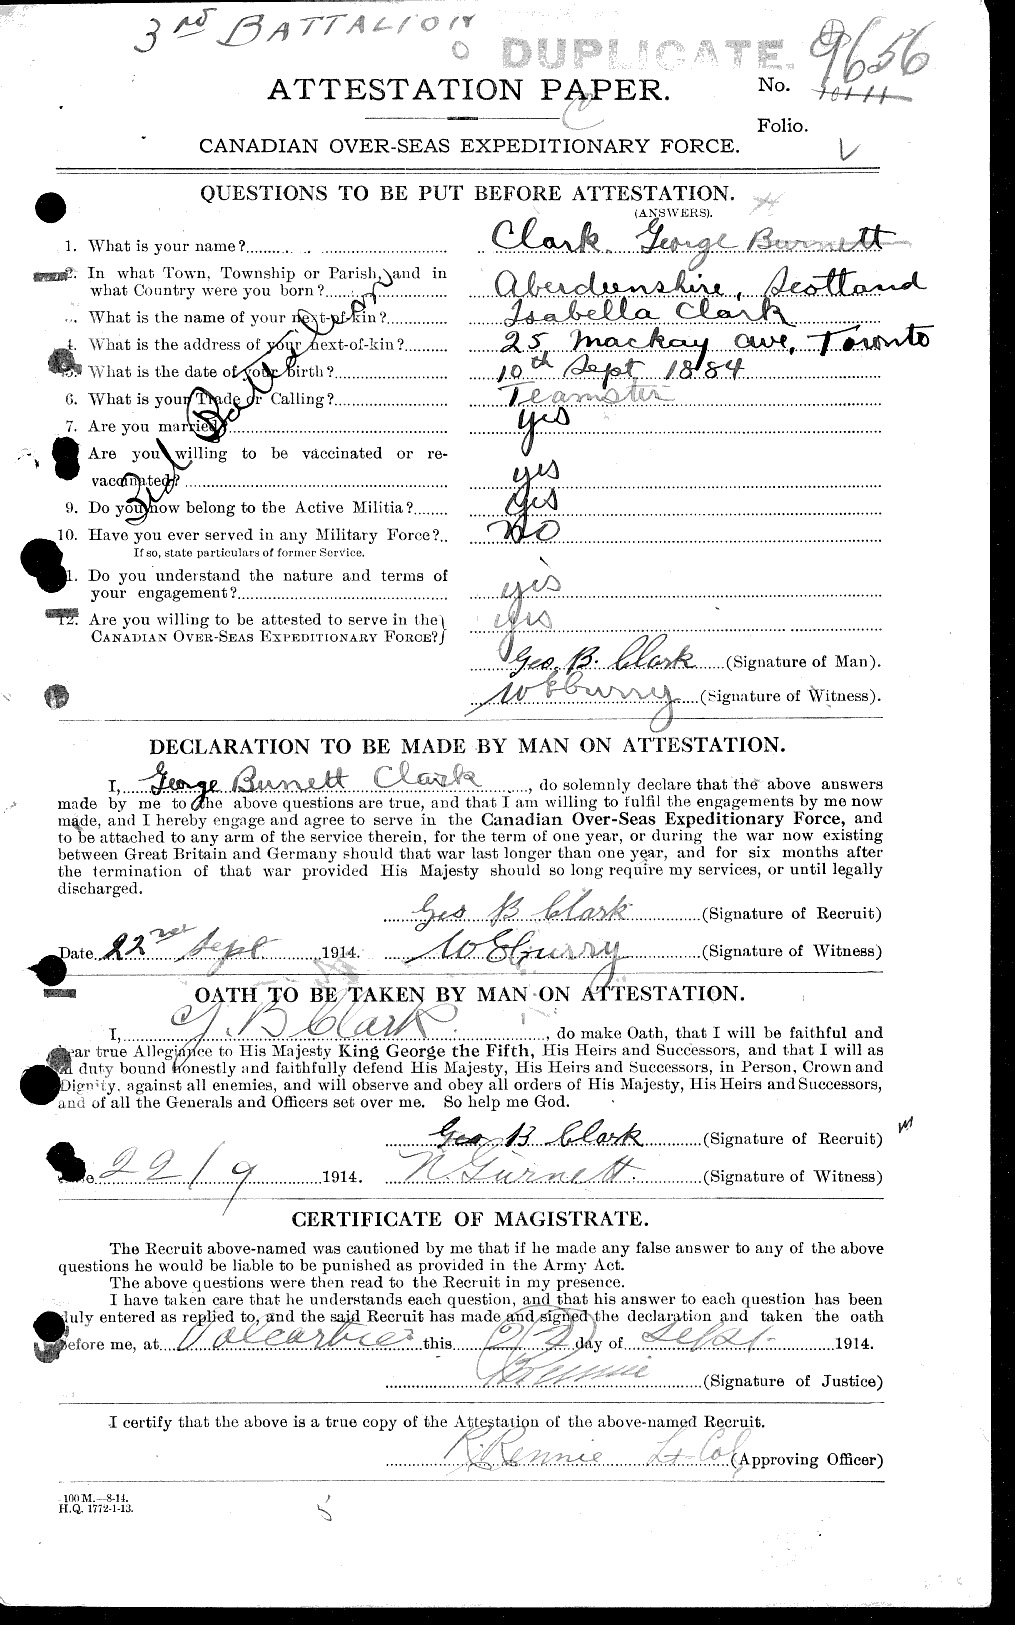 Personnel Records of the First World War - CEF 023178a